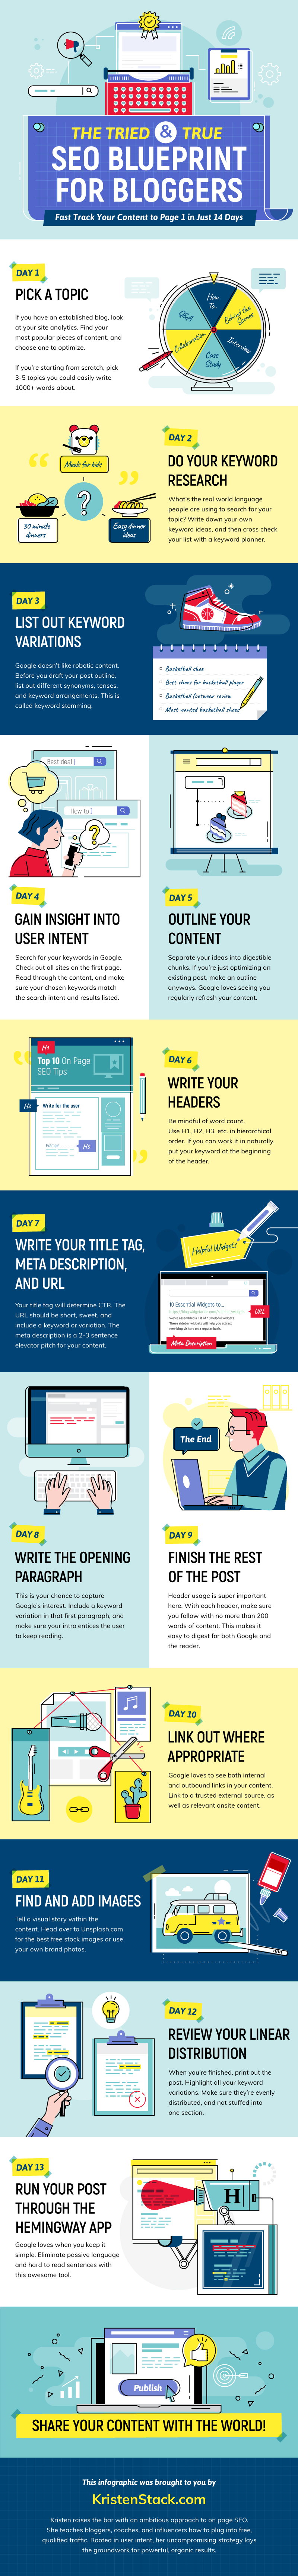 Infographic for The Tried & True SEO Blueprint For Bloggers